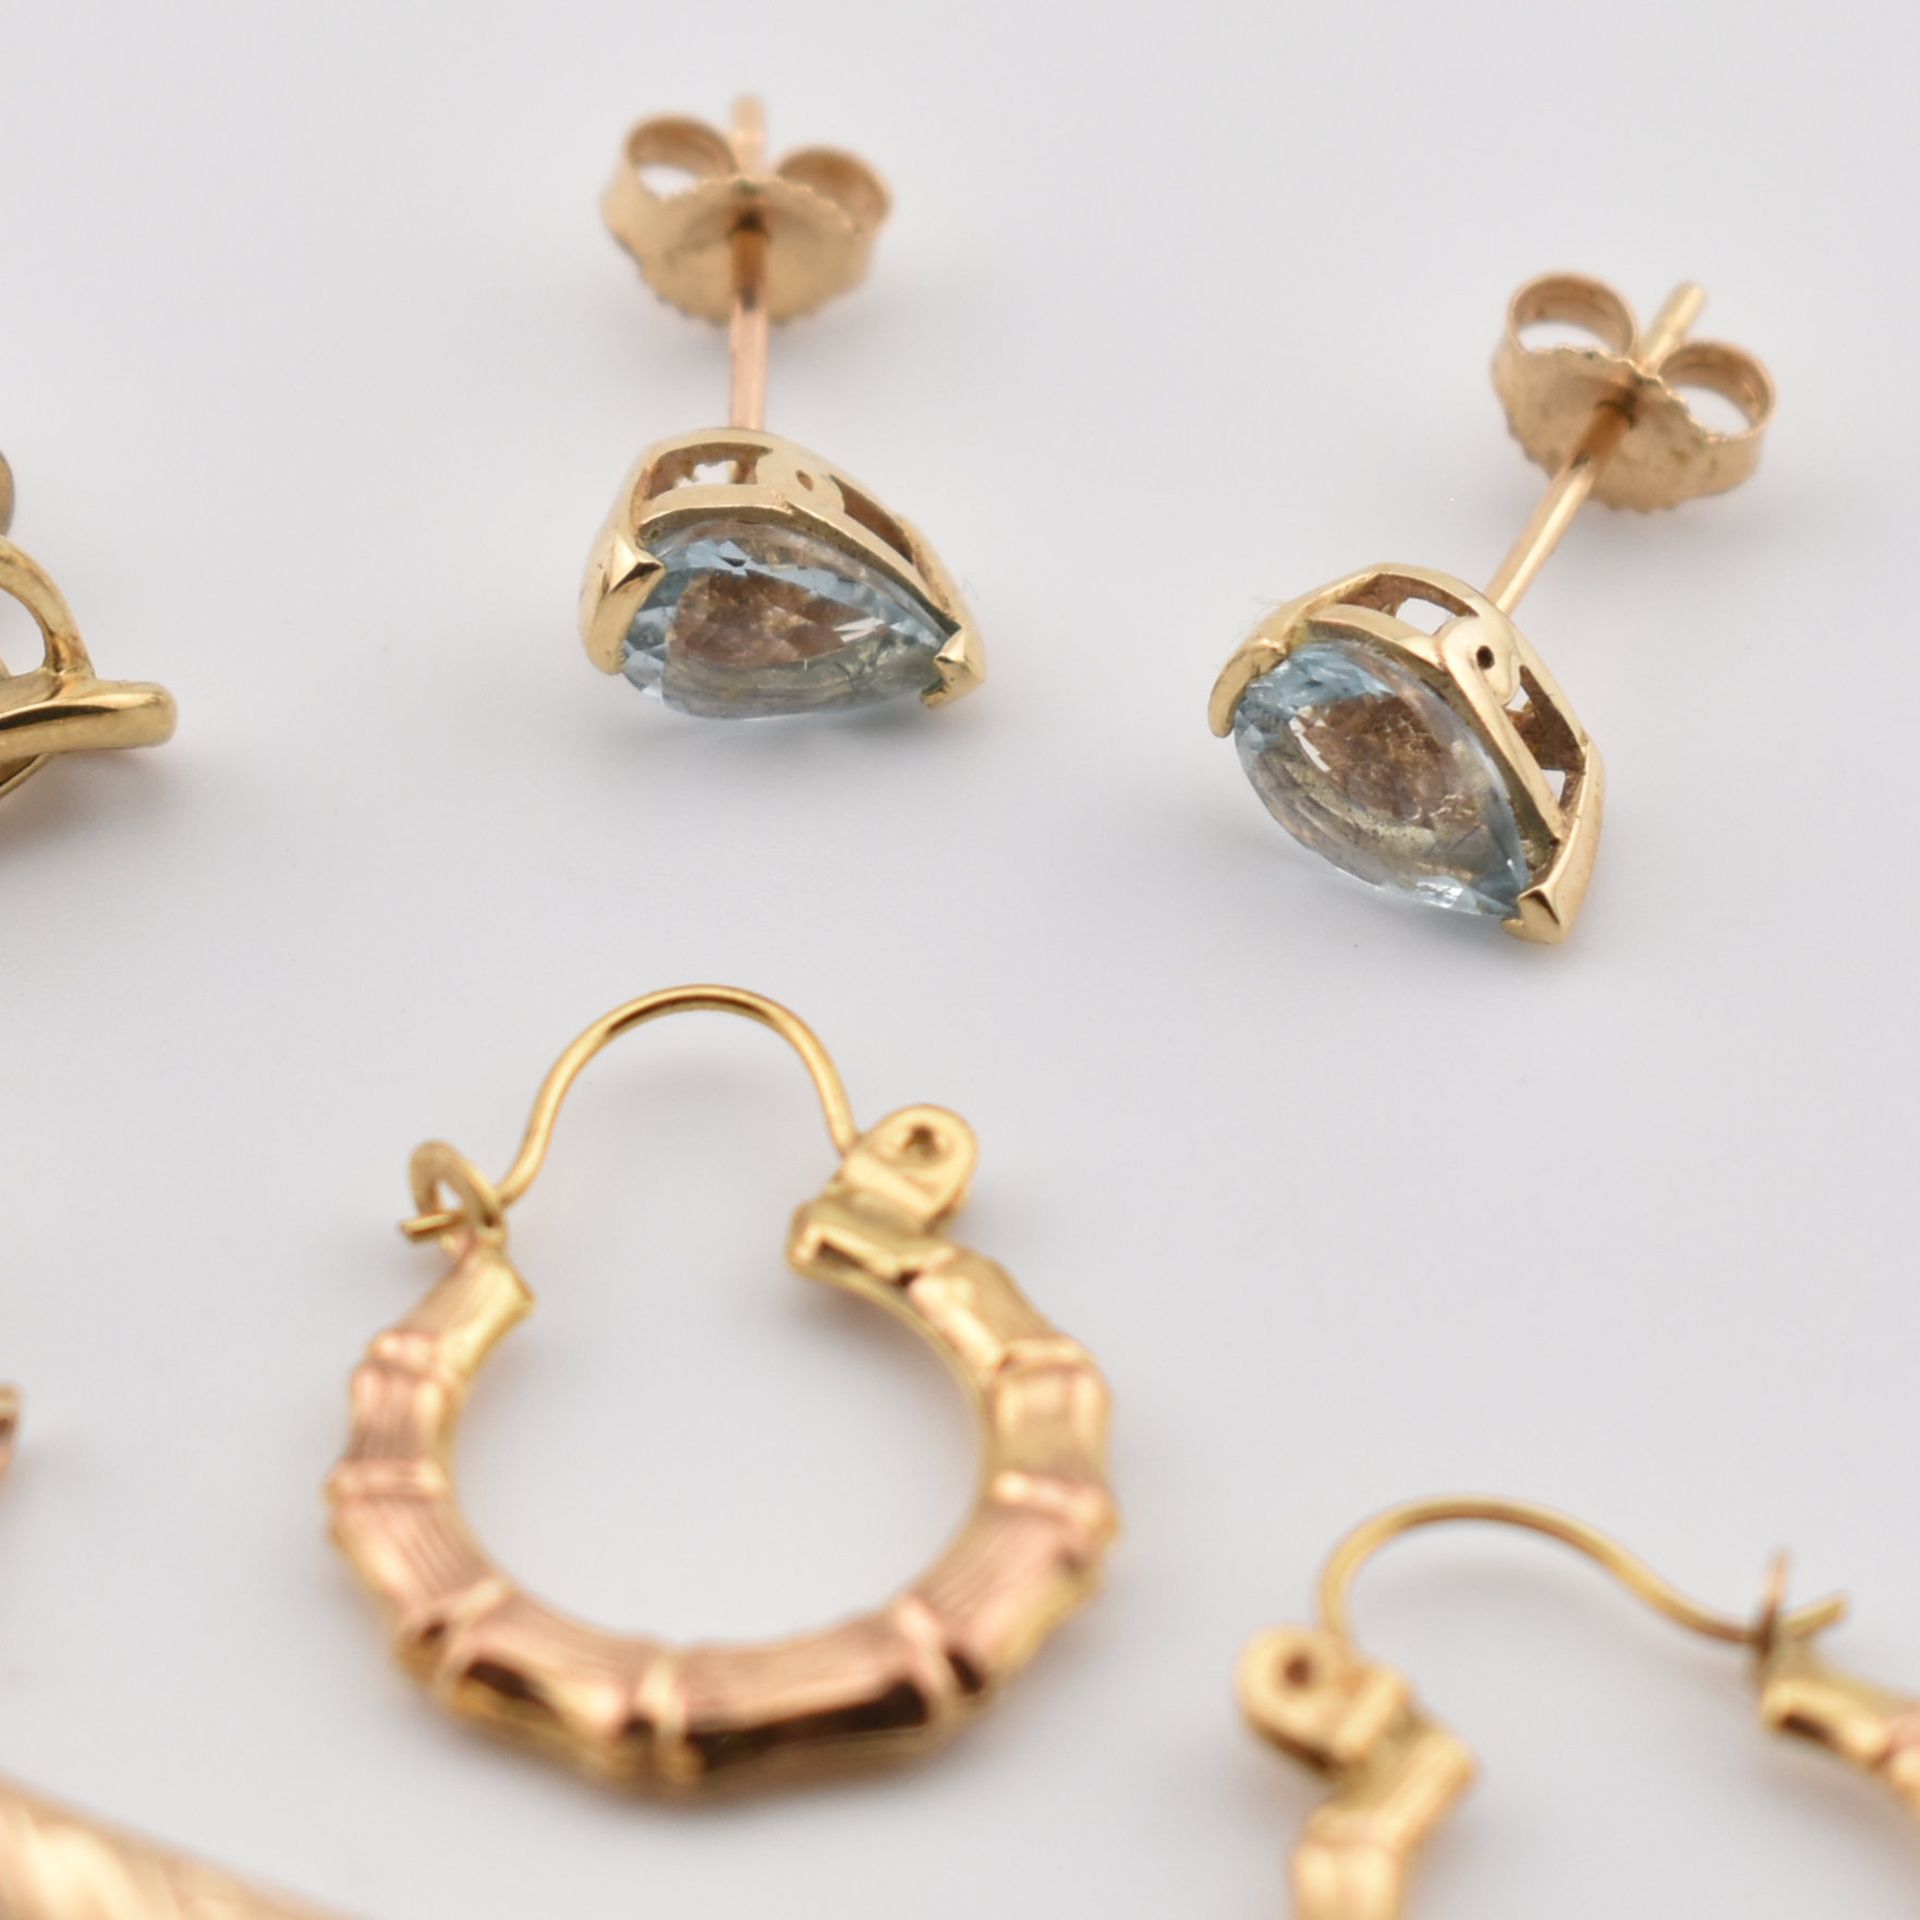 FOUR PAIRS OF 9CT GOLD & GEM SET EARRINGS - Image 2 of 4